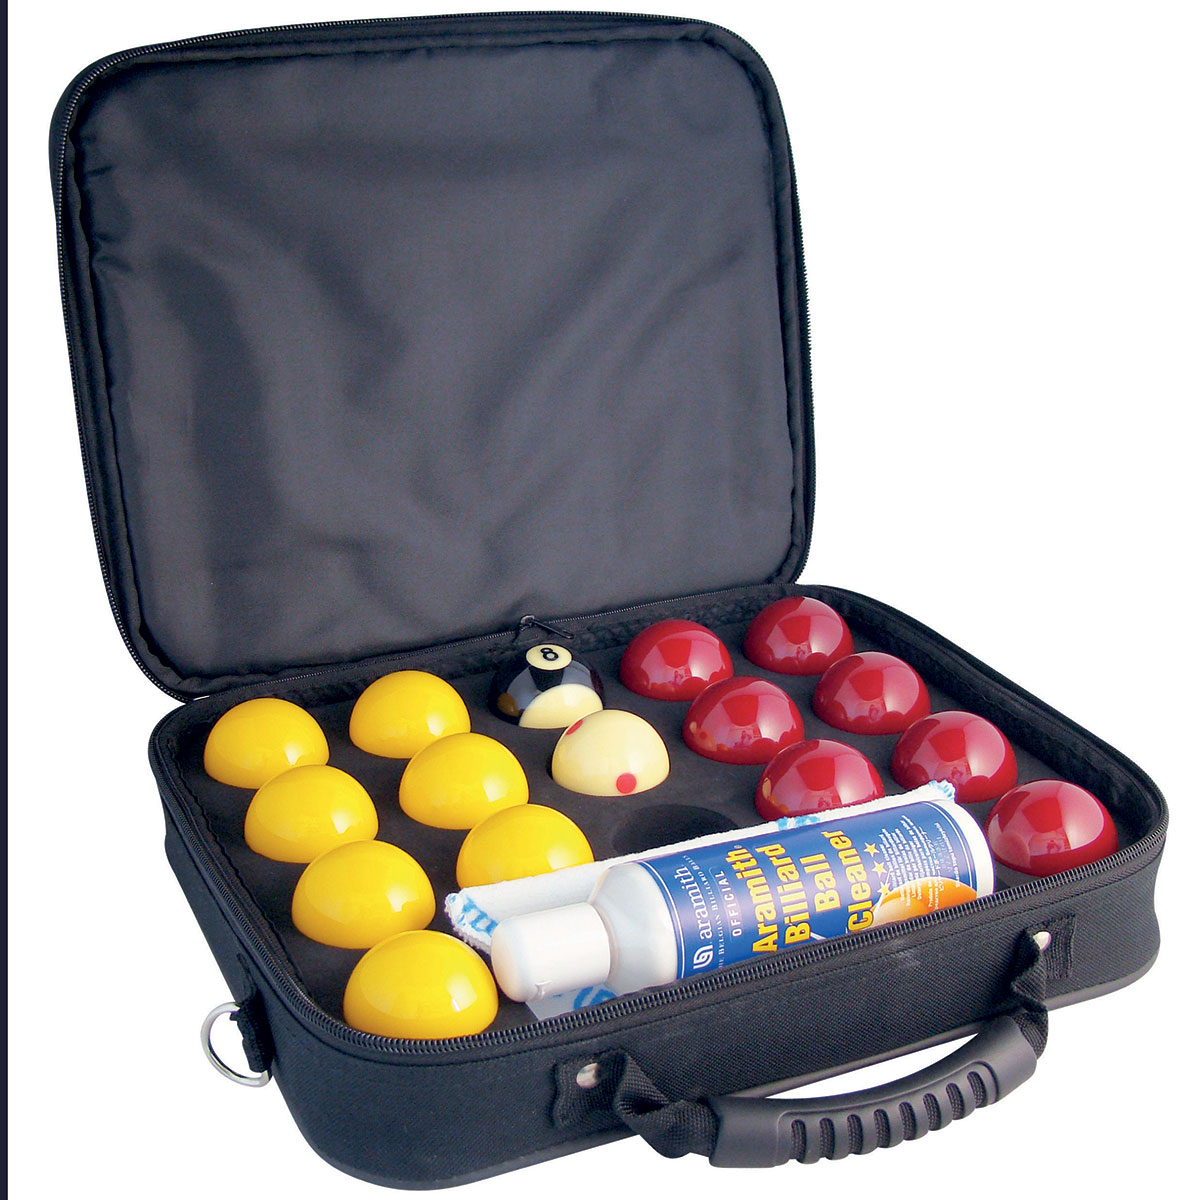 Super Aramith pro cup pool balls & Carry case + Cleaner & Cloth